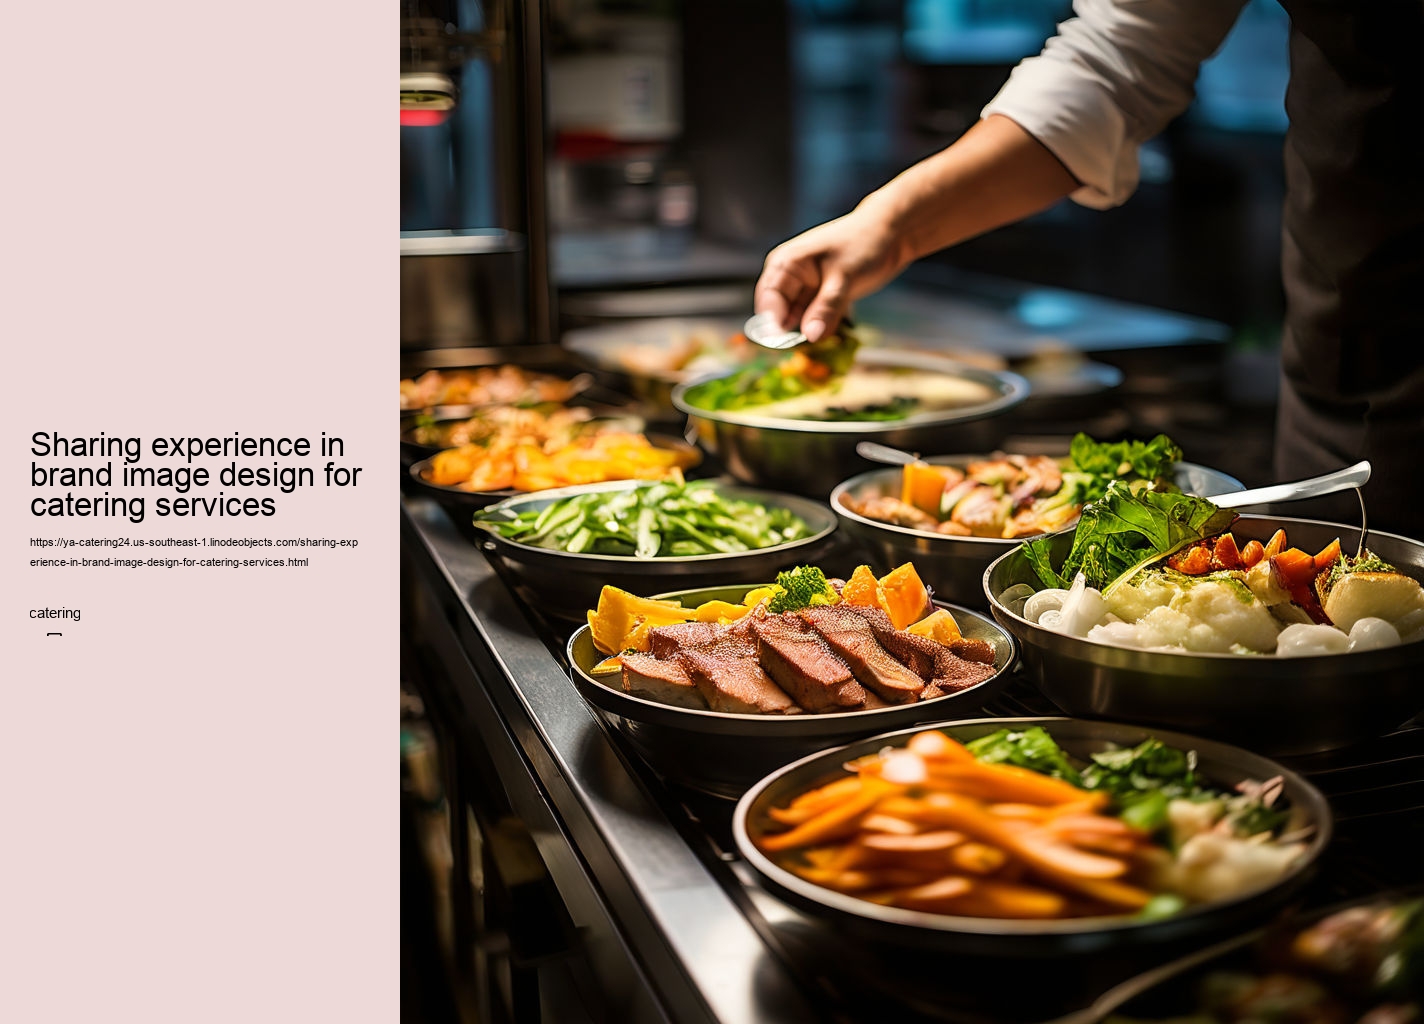 Sharing experience in brand image design for catering services